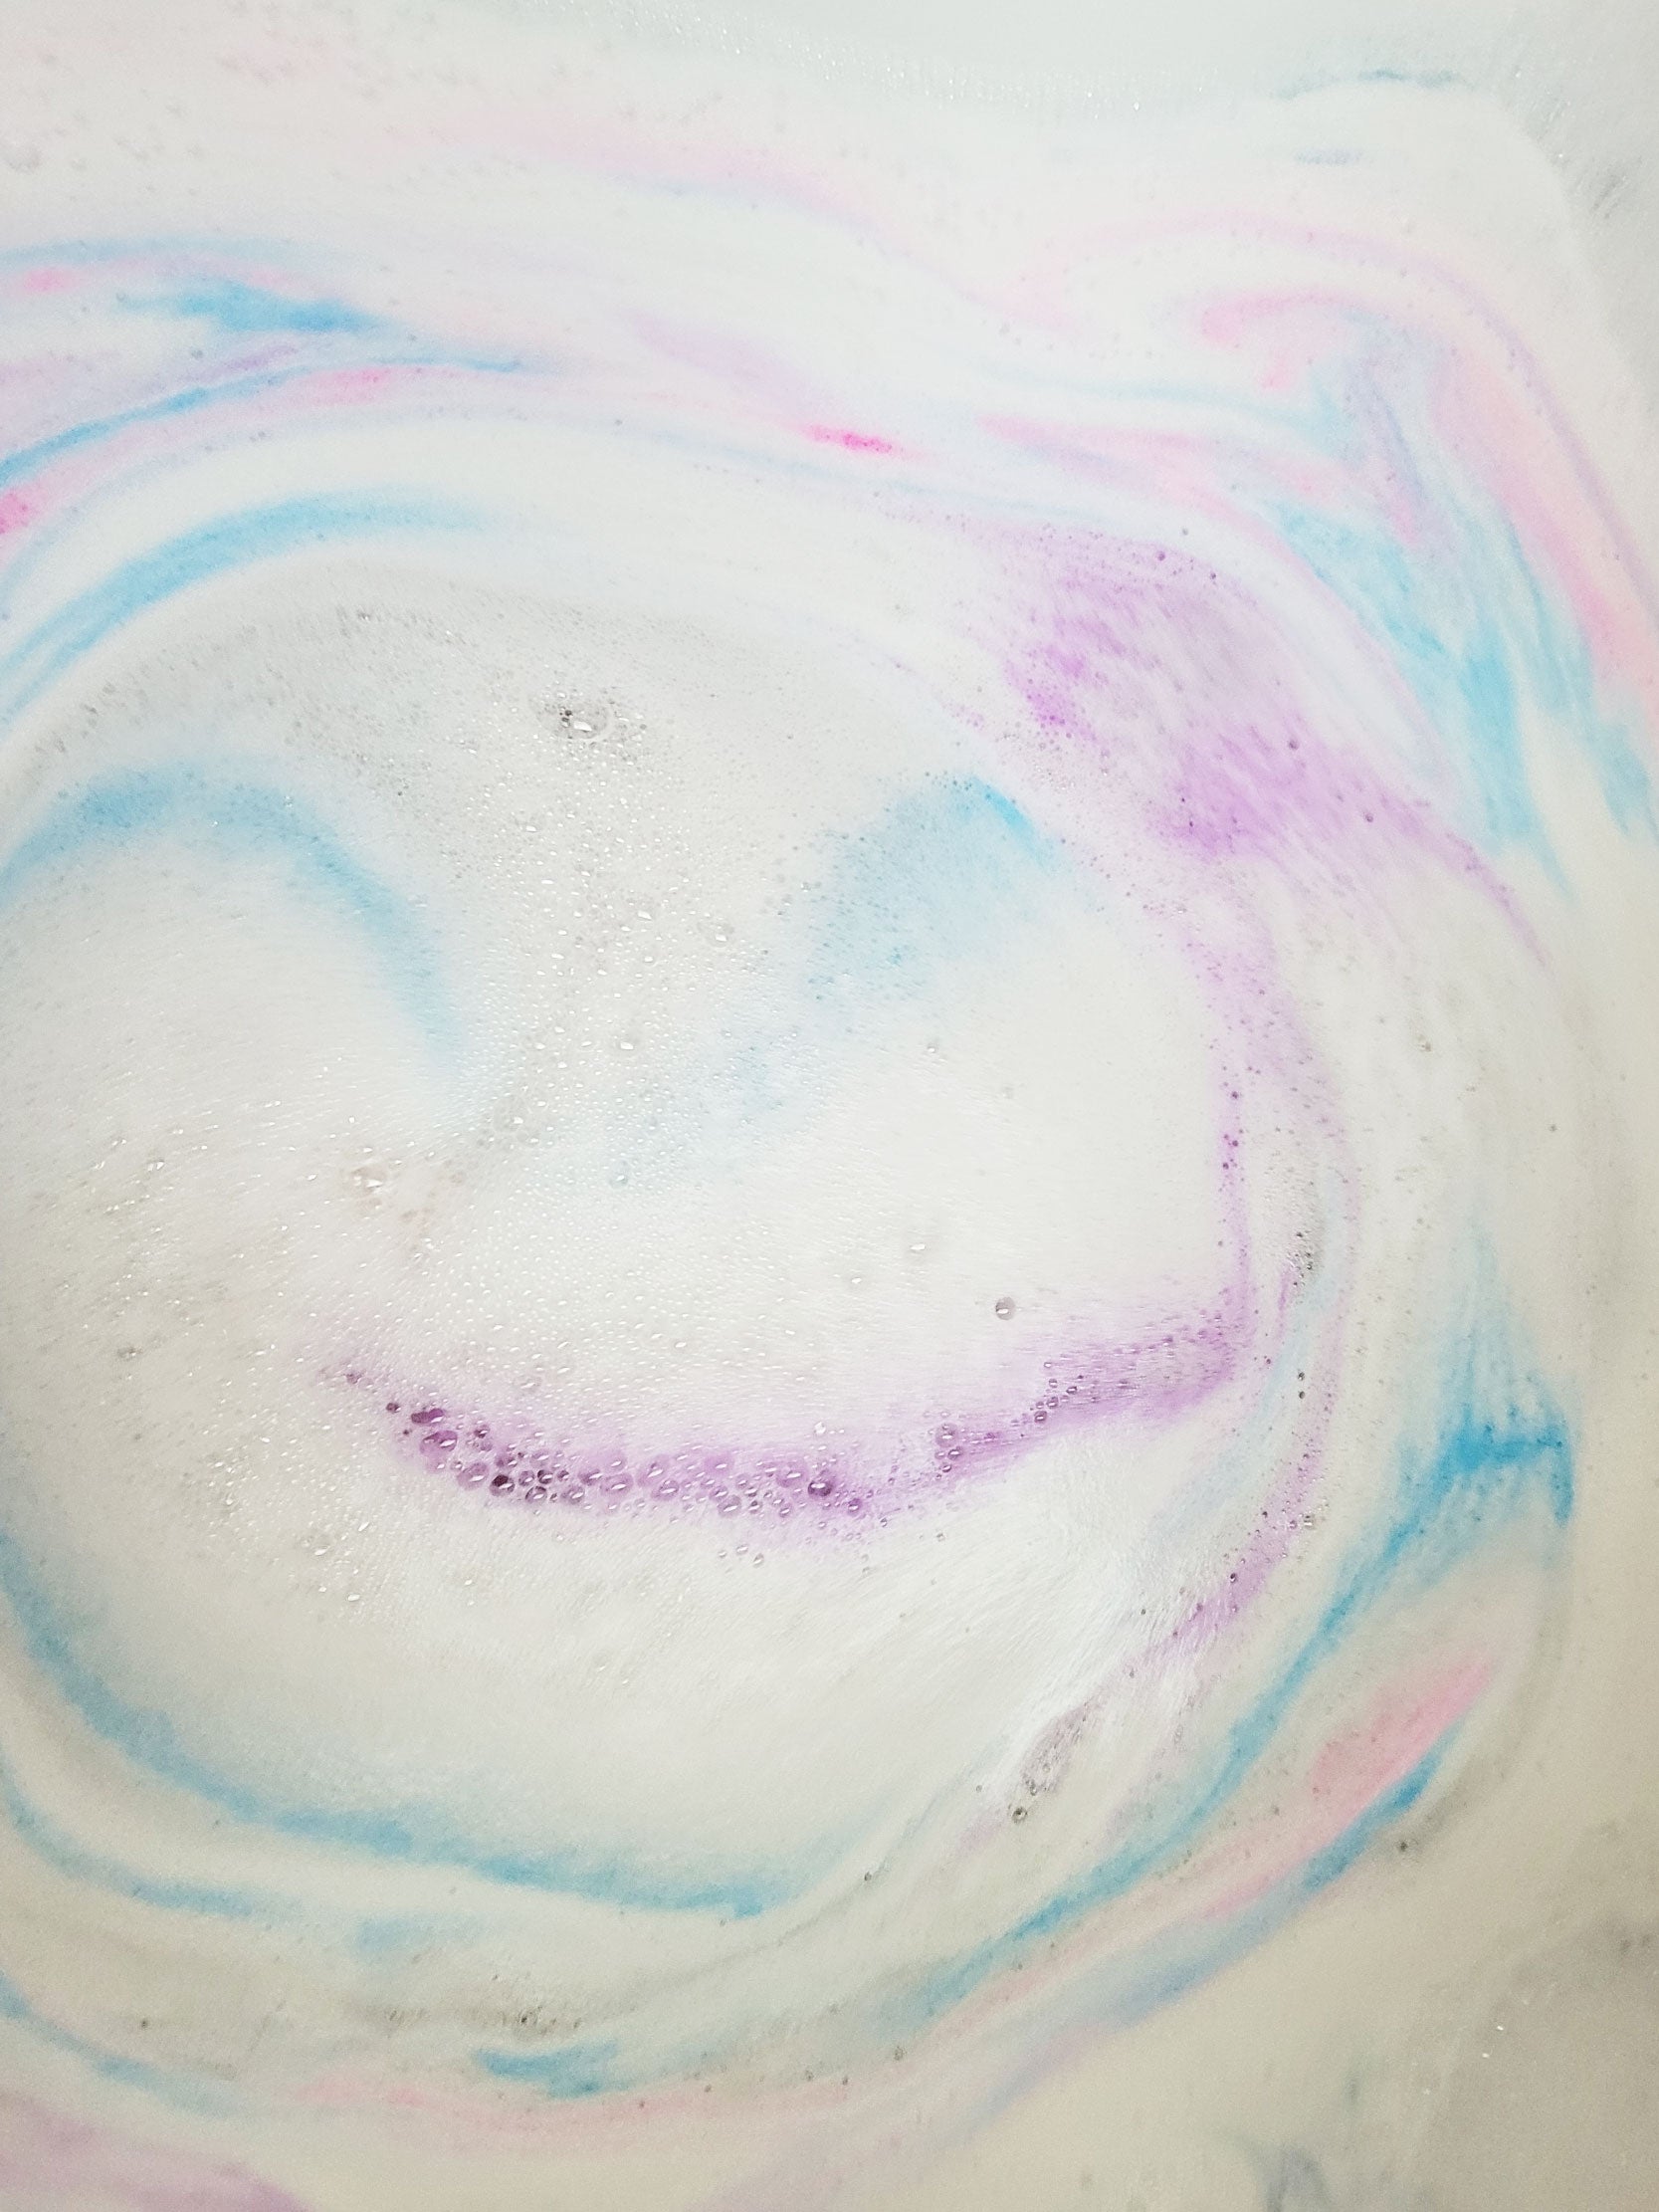 Daydreaming Clouds Bath Bomb – Yours Truly Bath Co